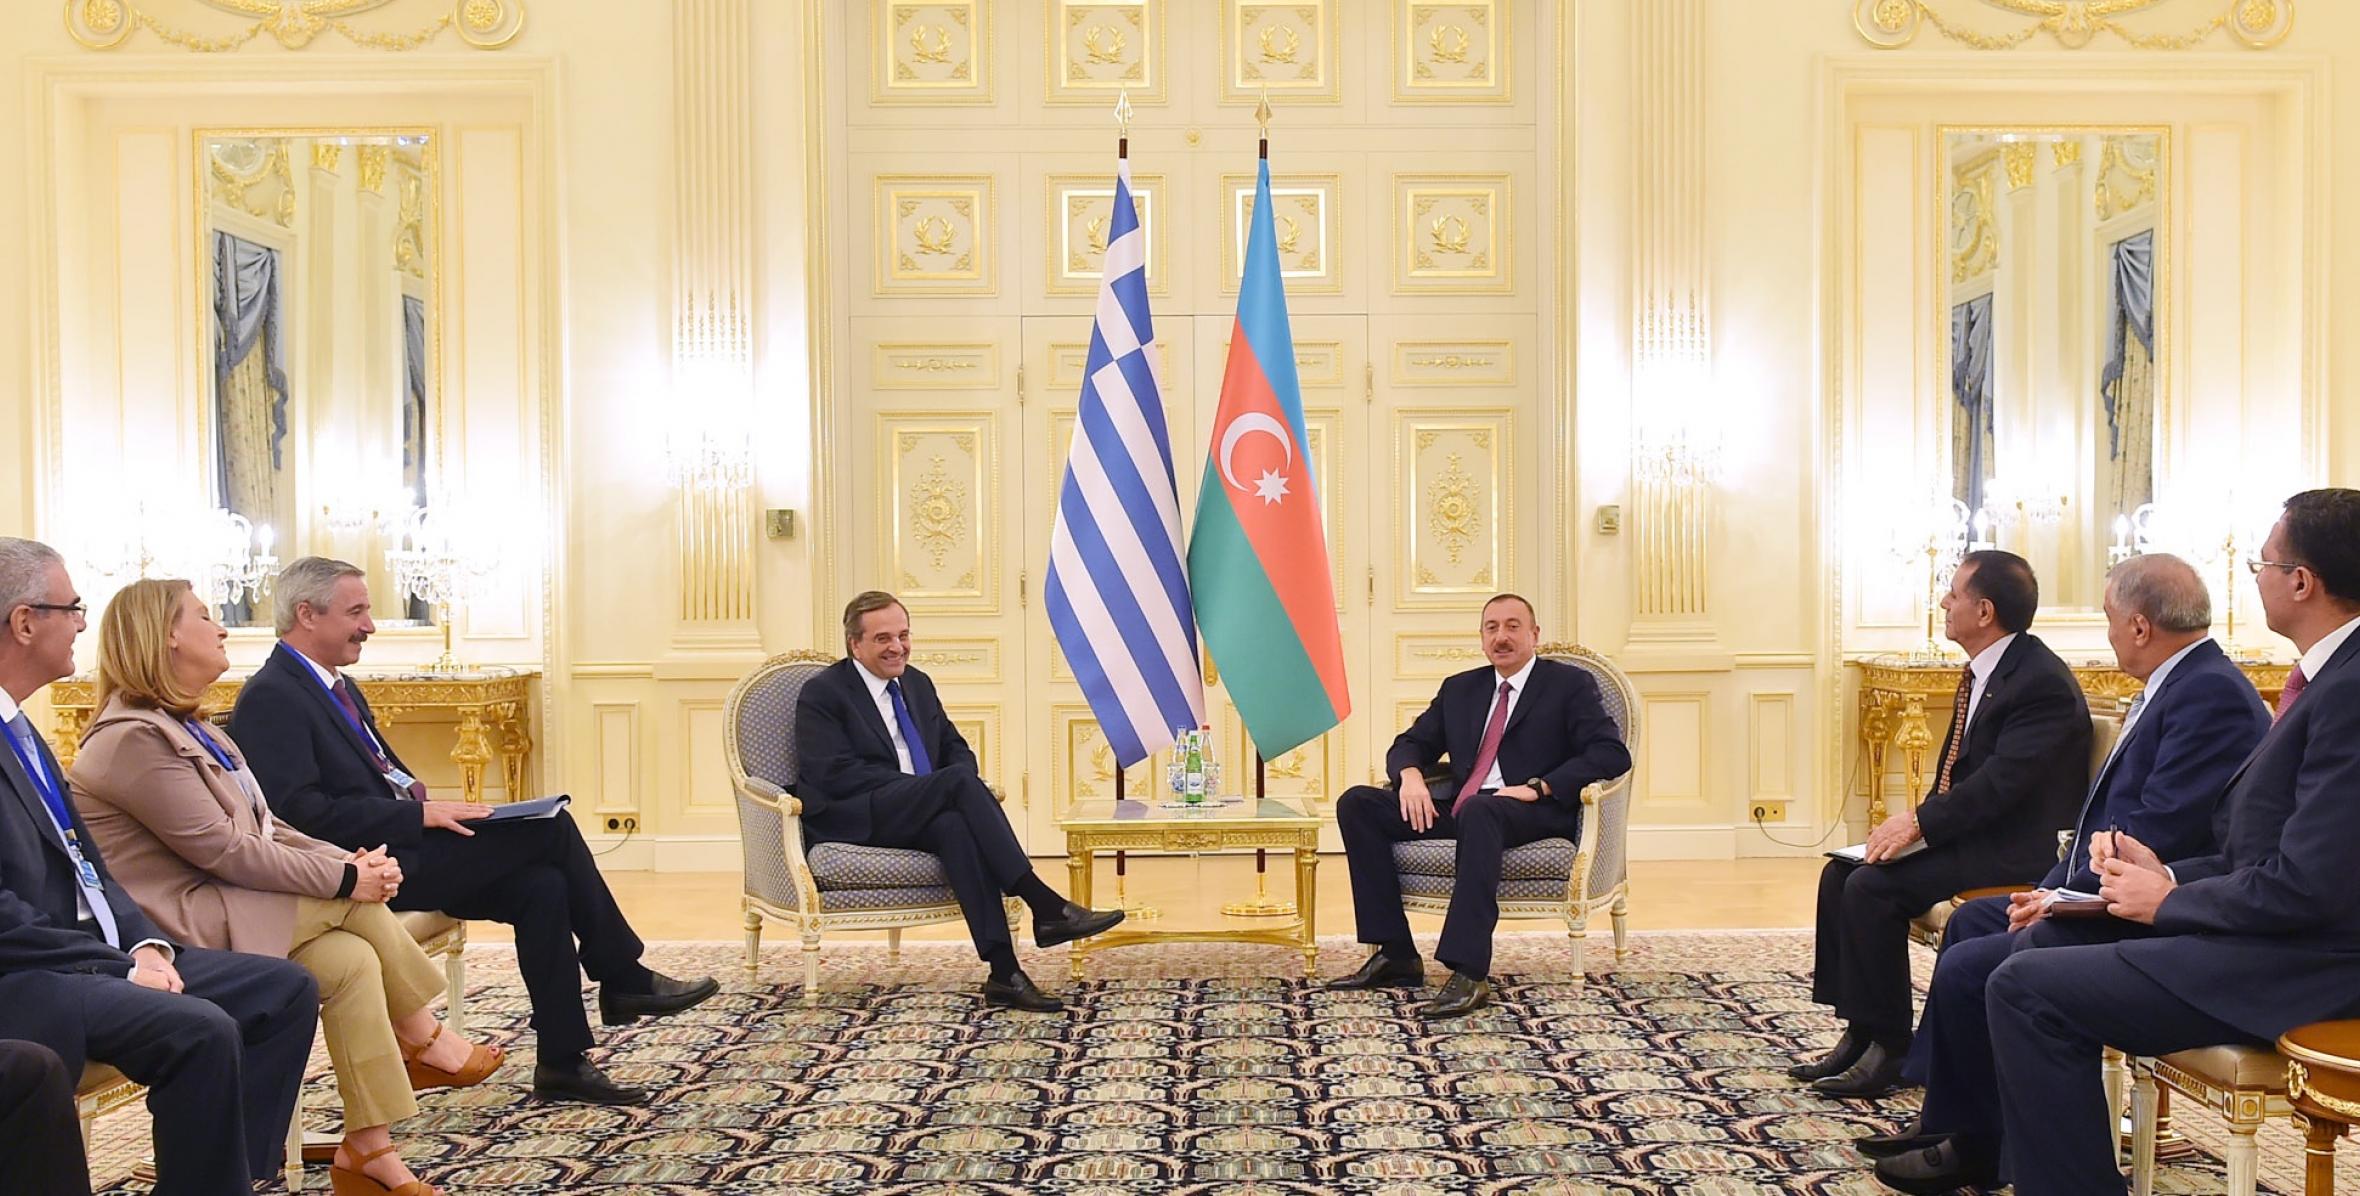 Ilham Aliyev and Prime Minister of Greece Antonis Samaras held an expanded meeting